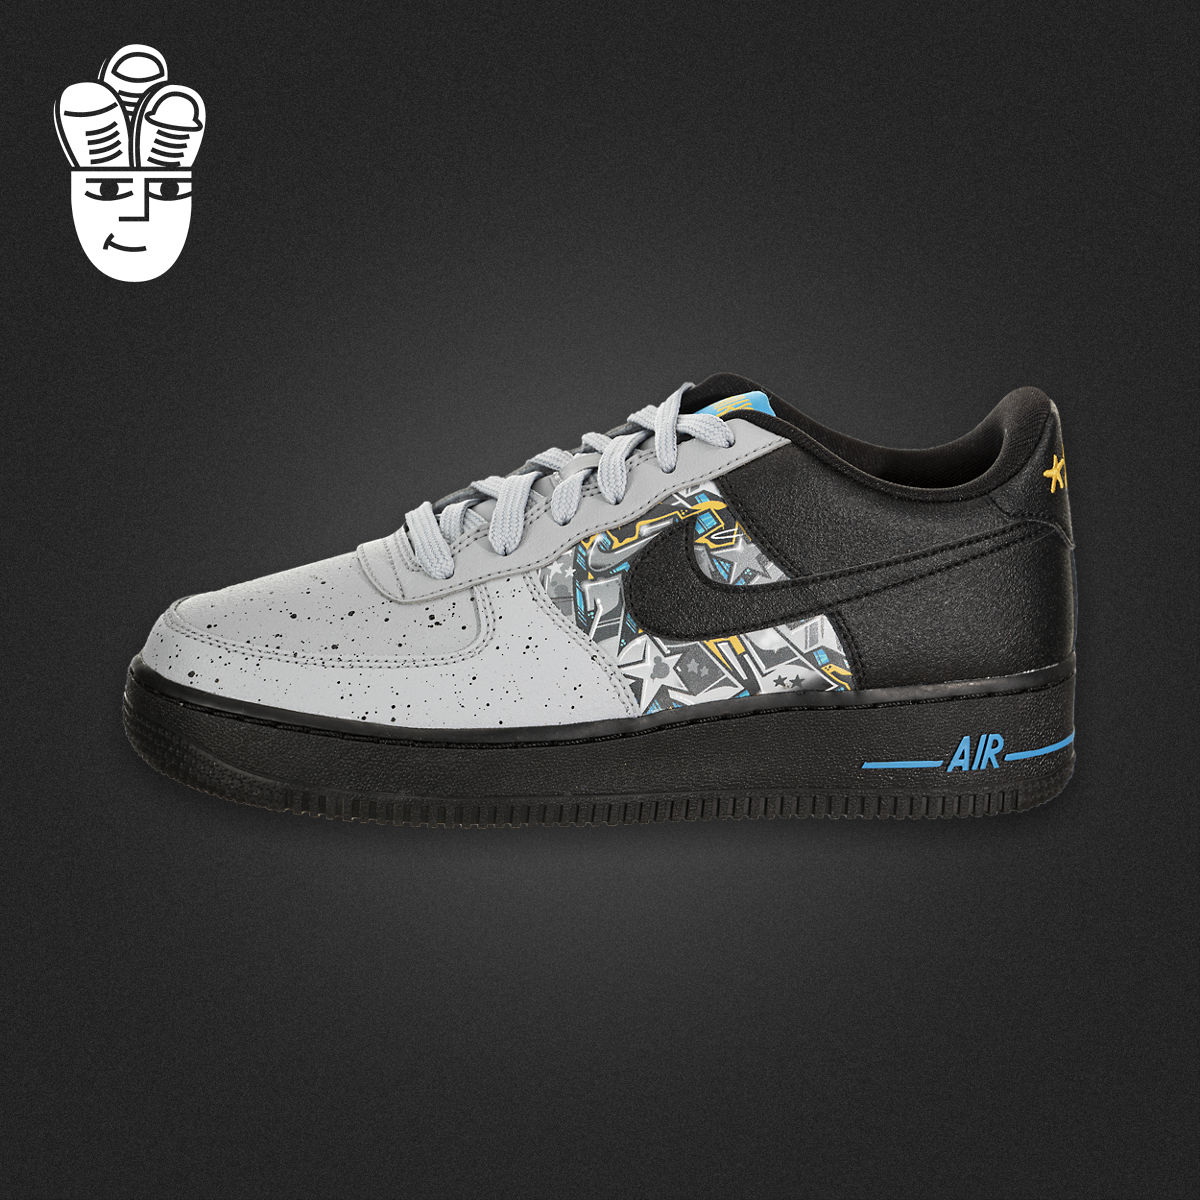 Nike Air Force 1 LV8 KSA Nike Men's Shoes Women's Shoes GS Air Force One Low top Casual Board Shoes